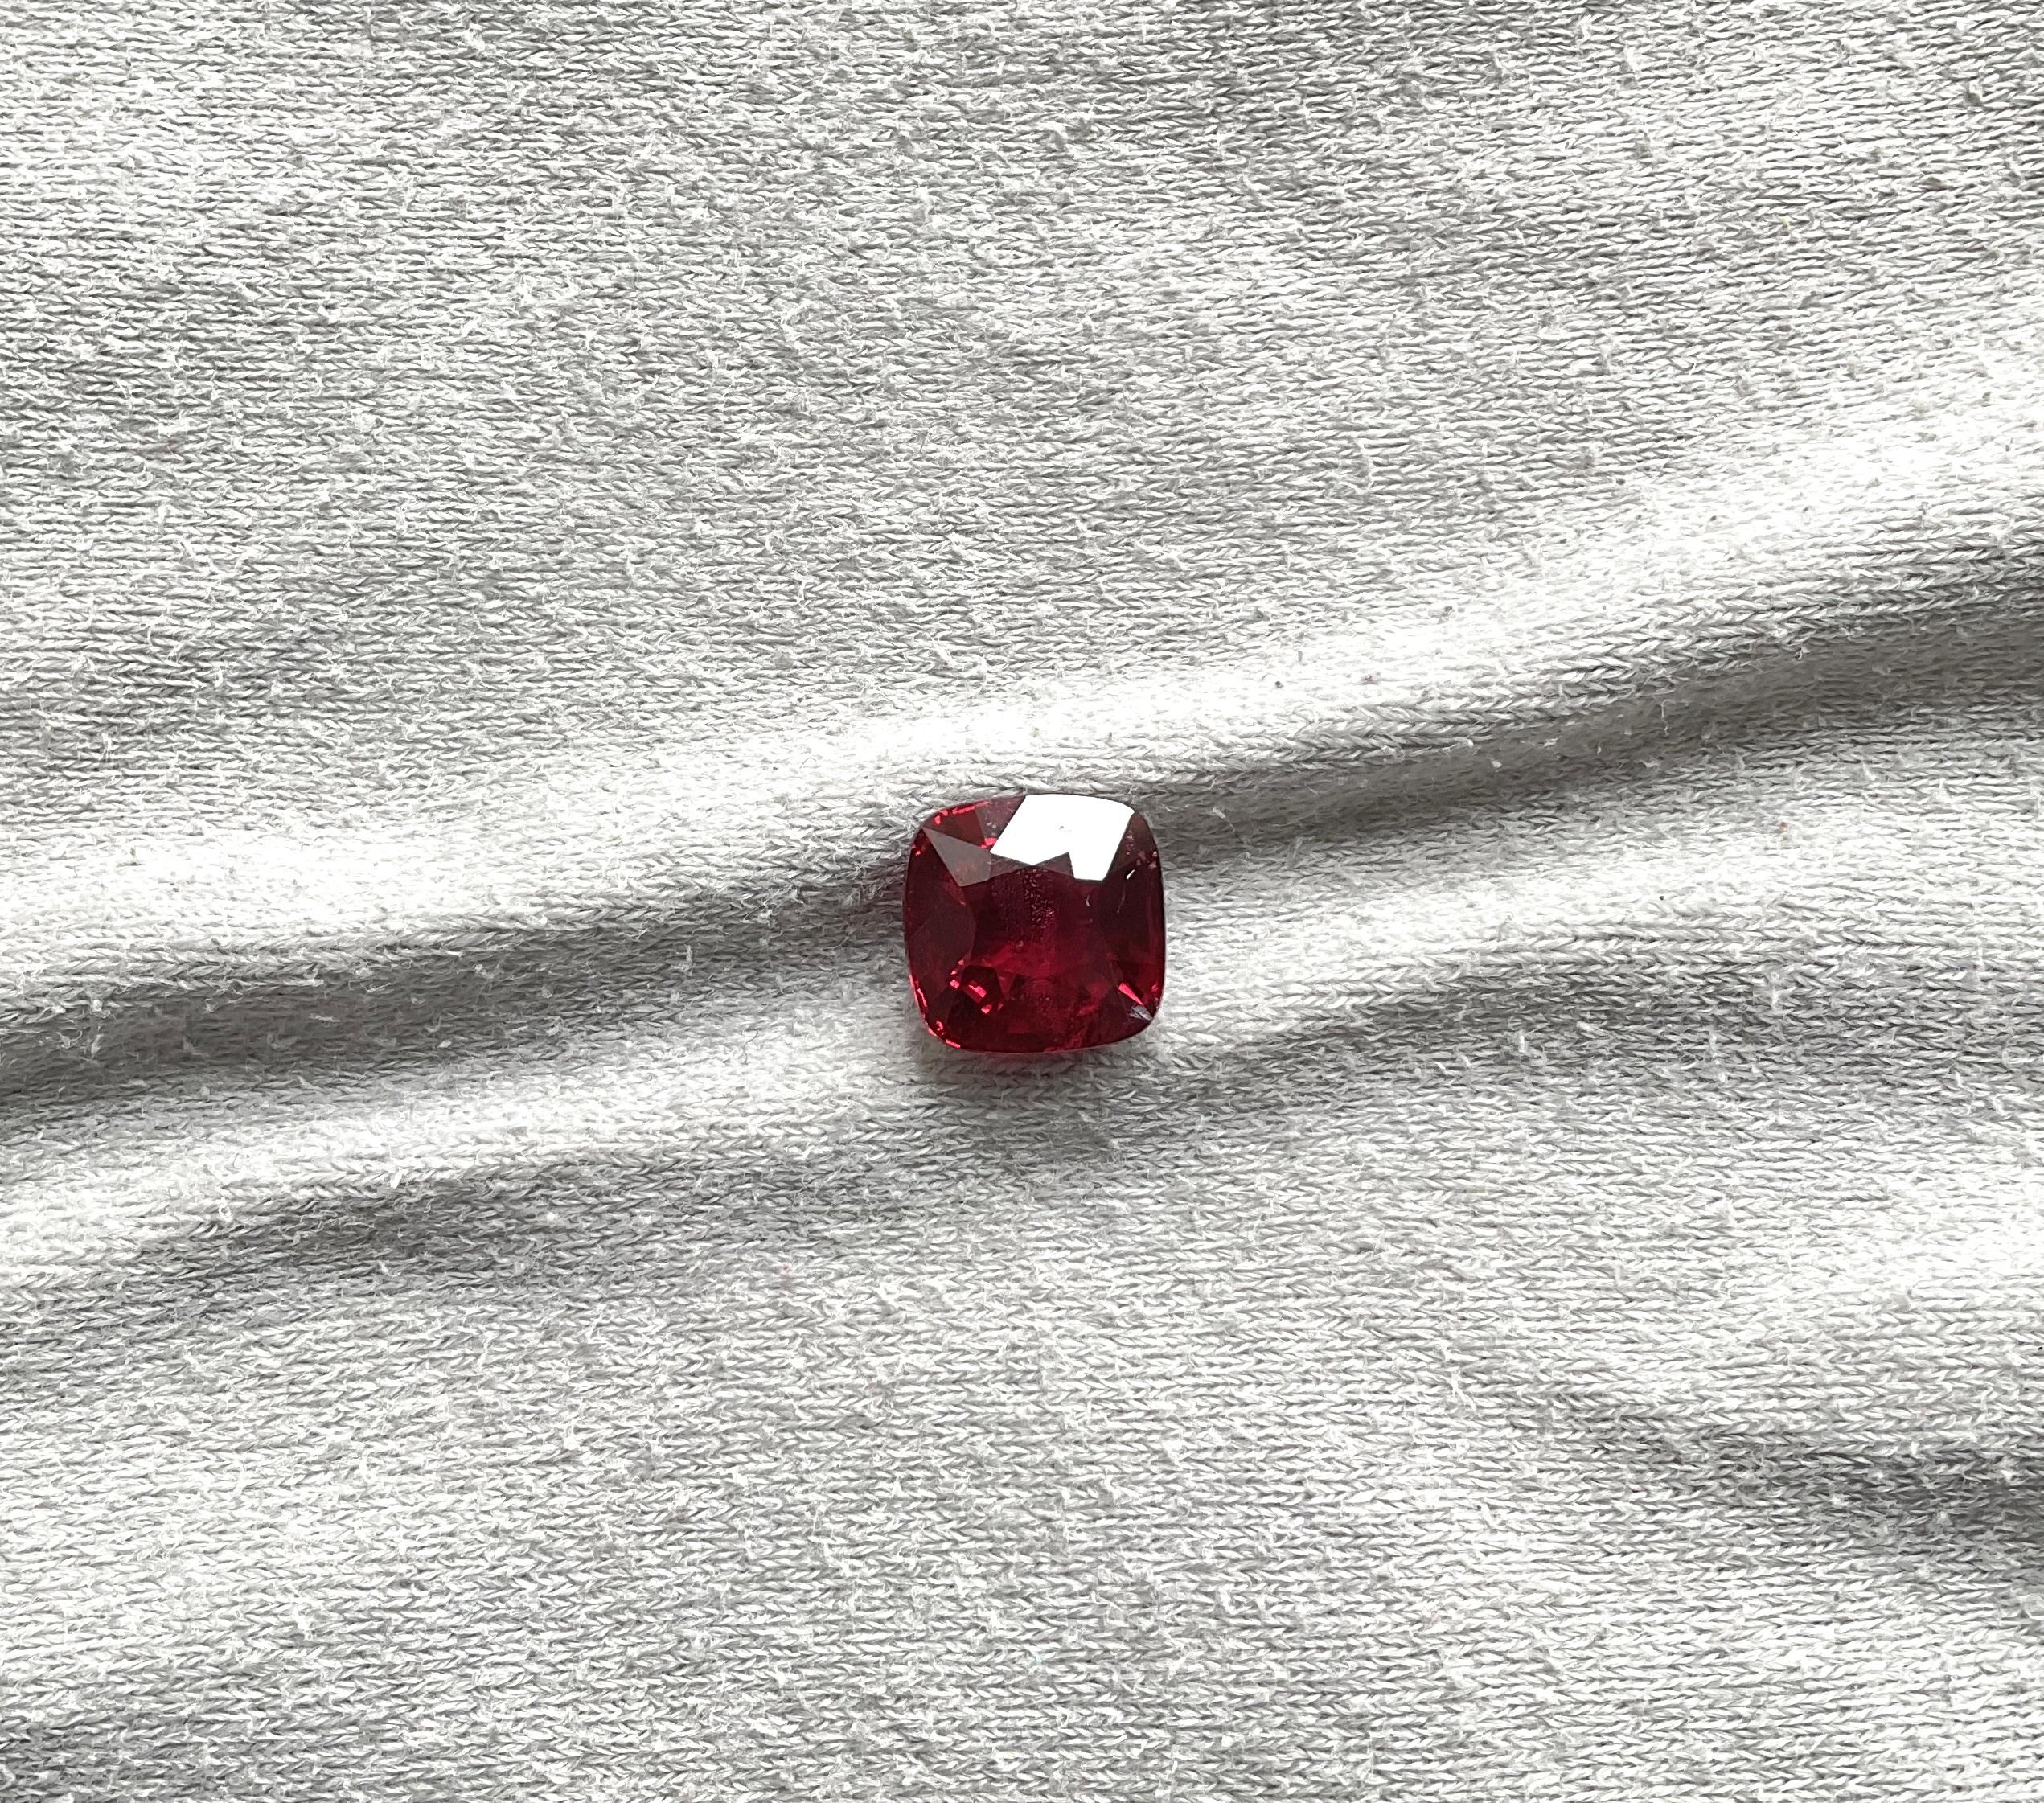 Modern certified 5.56 carats burmese red spinel natural cushion cut stone natural gem For Sale